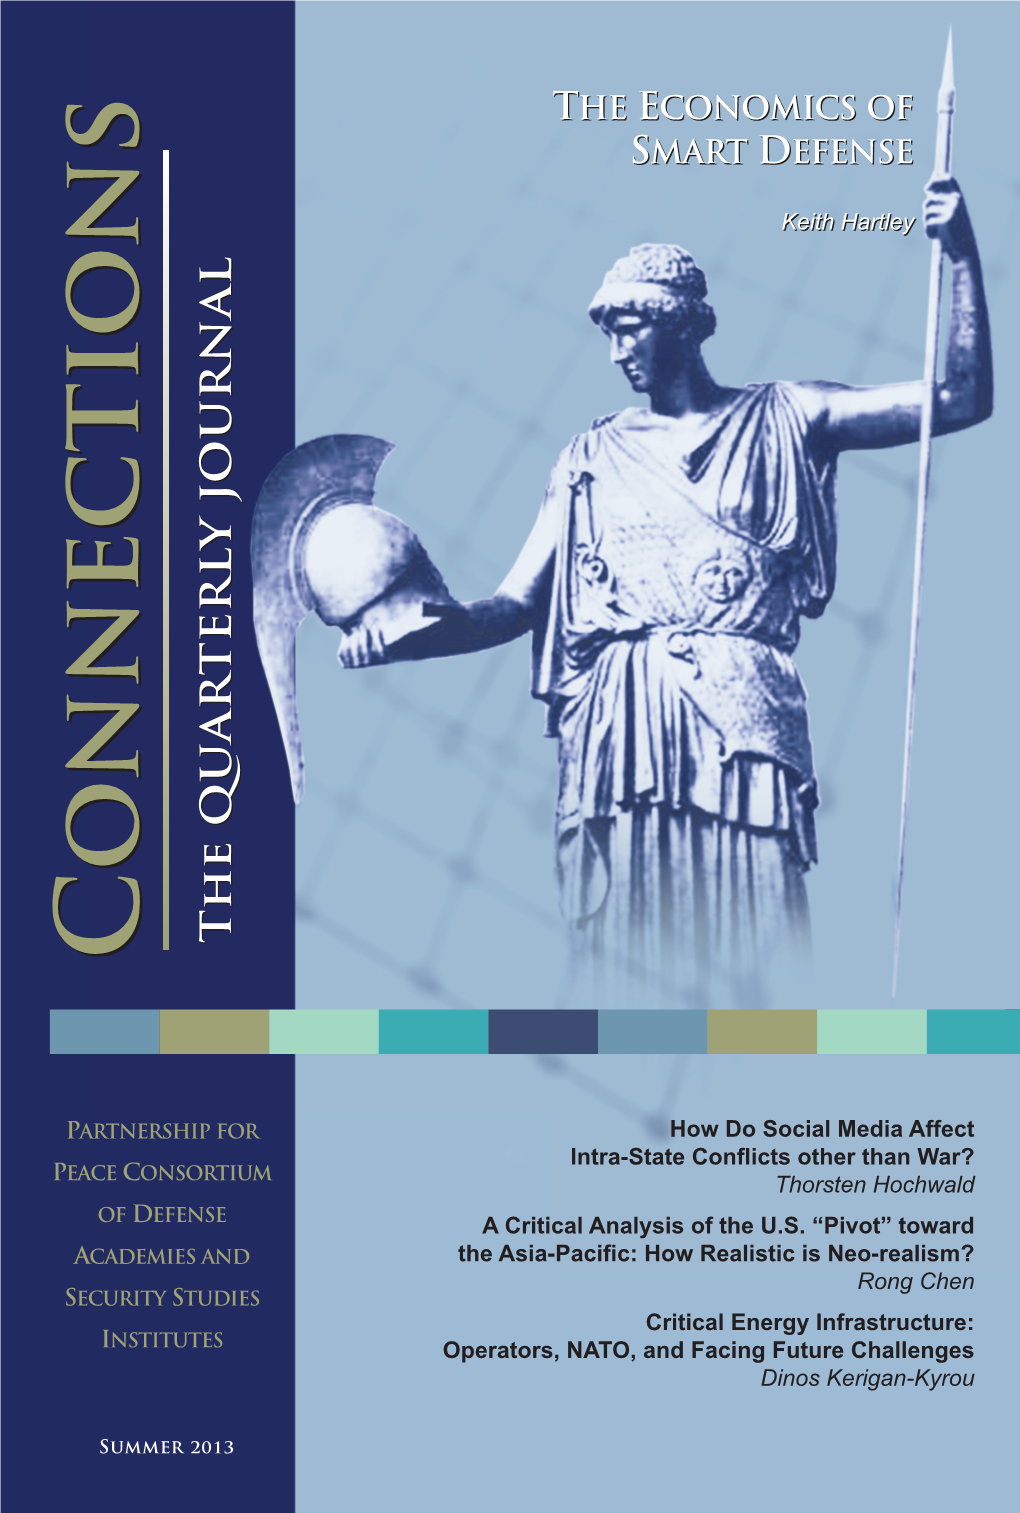 Connections: the Quarterly Journal Vol. 12, No. 3, Summer 2013